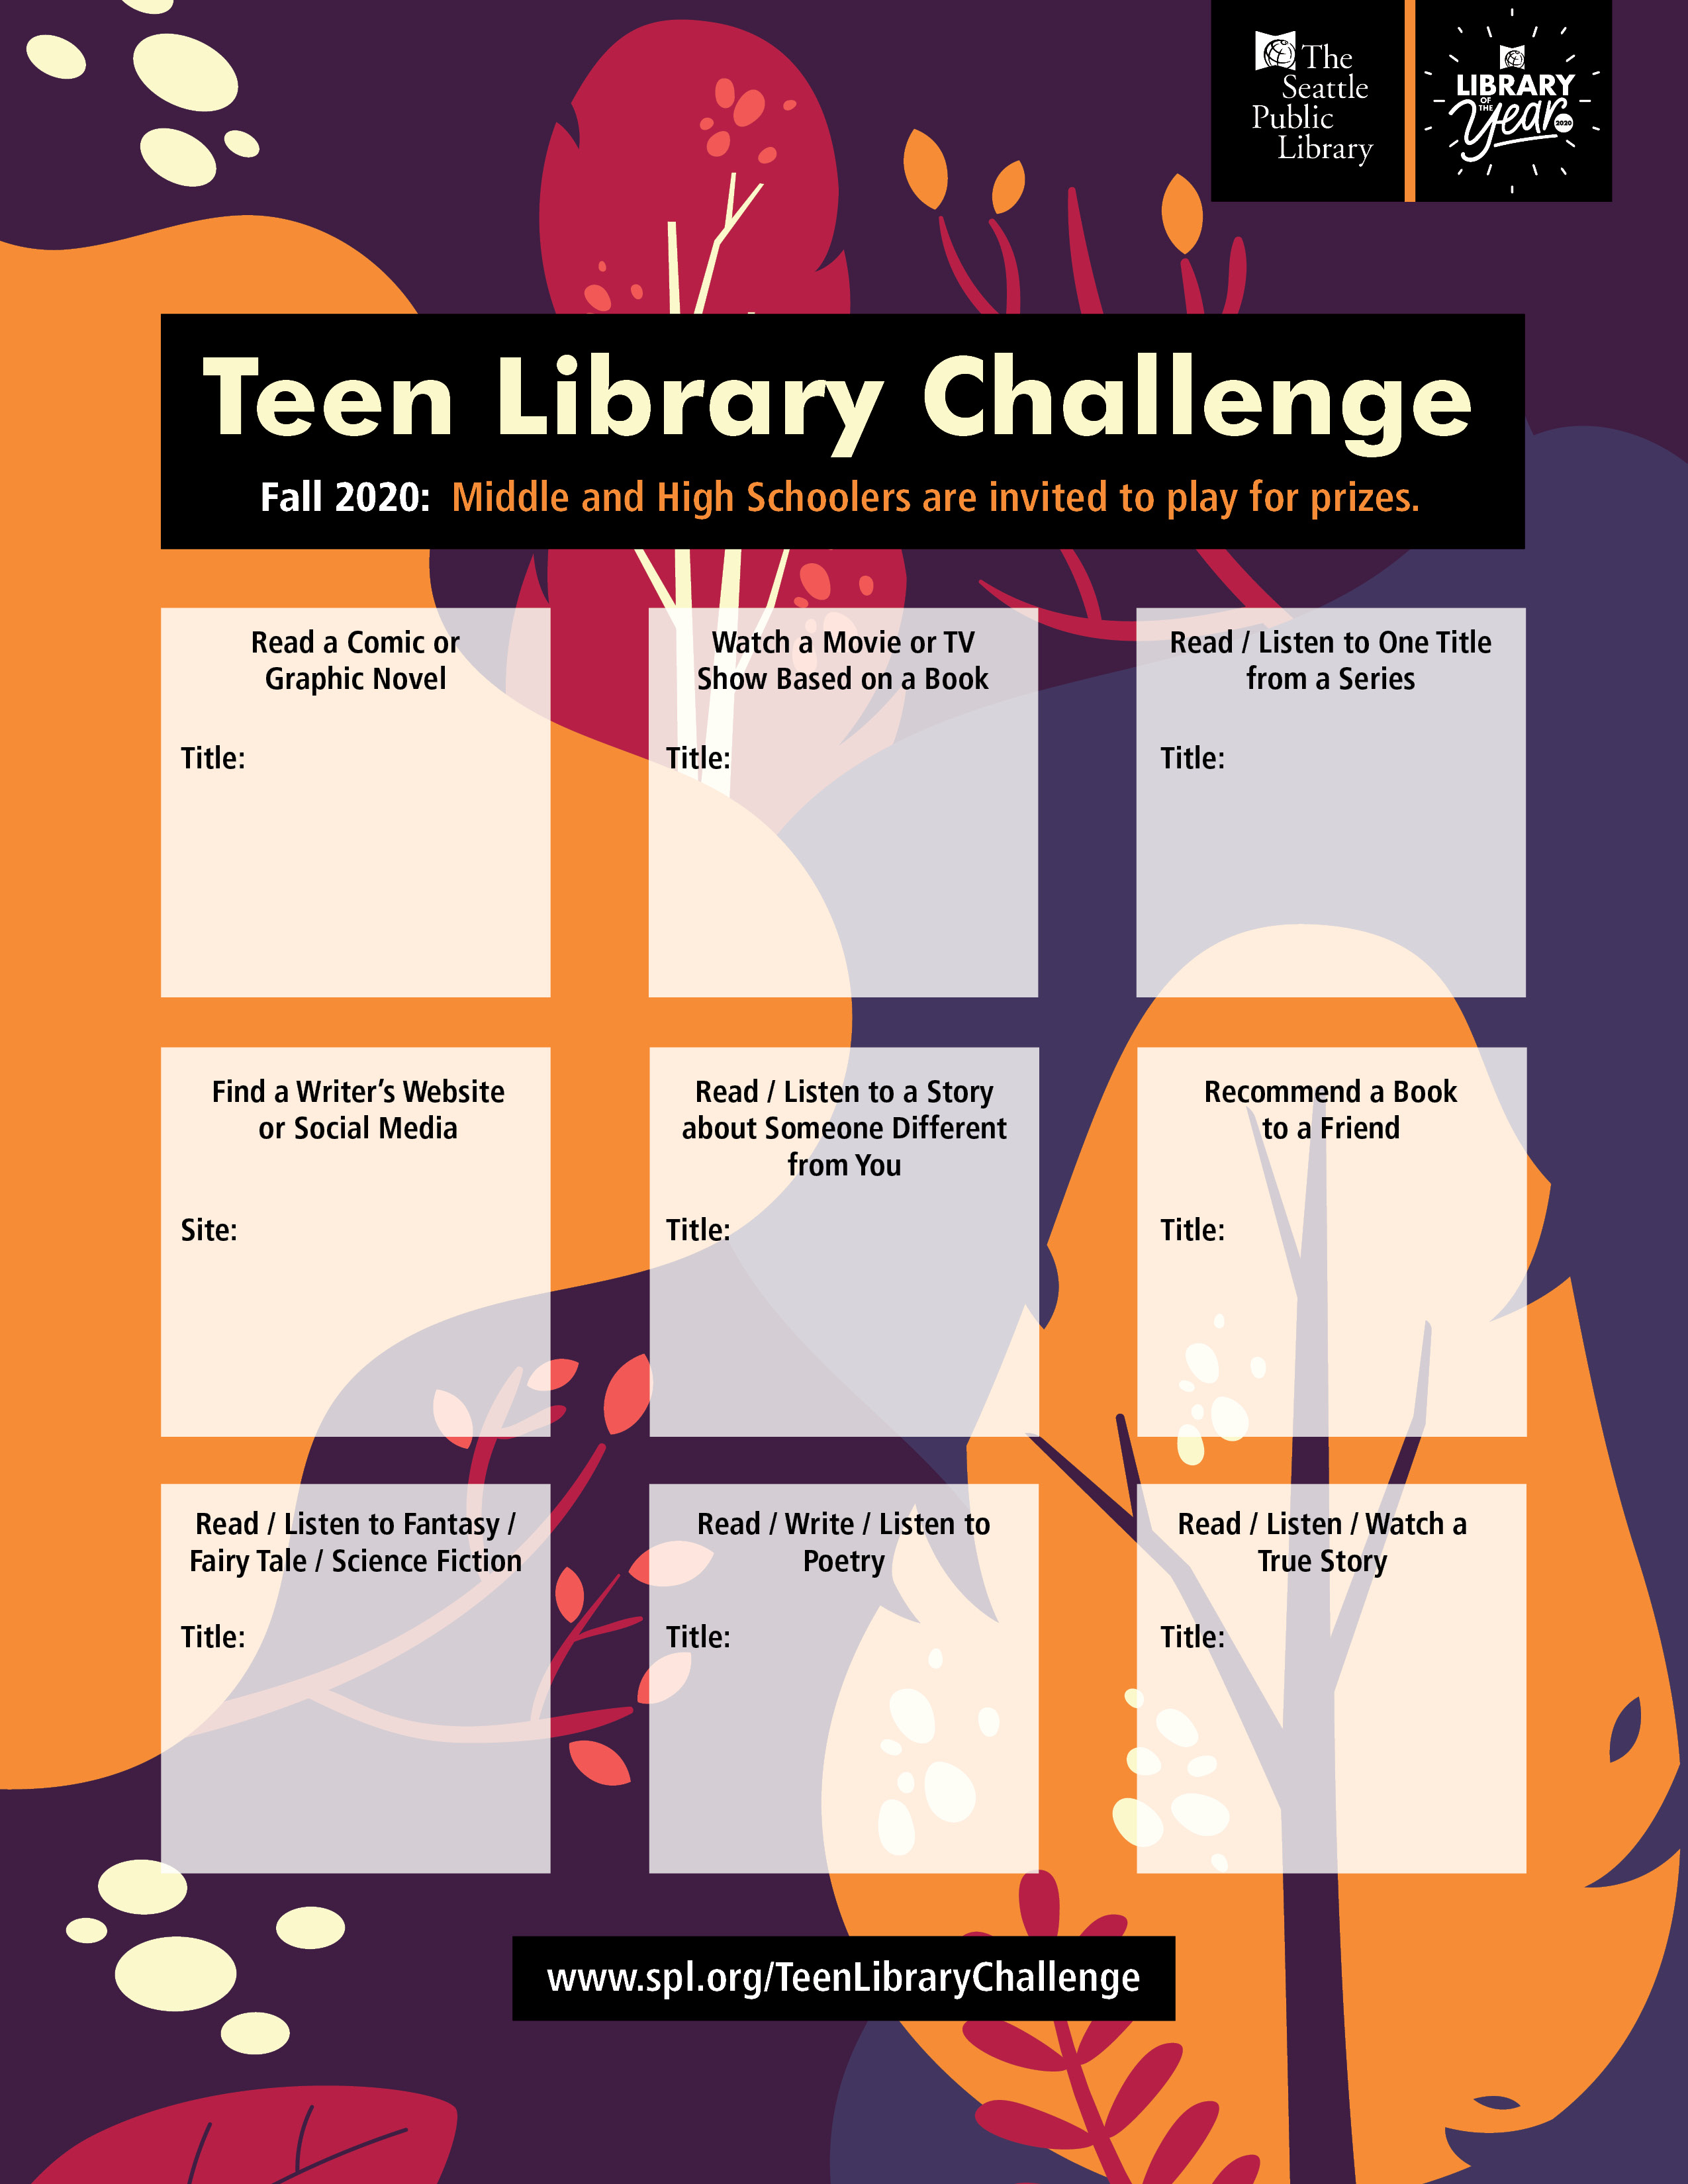 20120 Fall teen Library challenge card